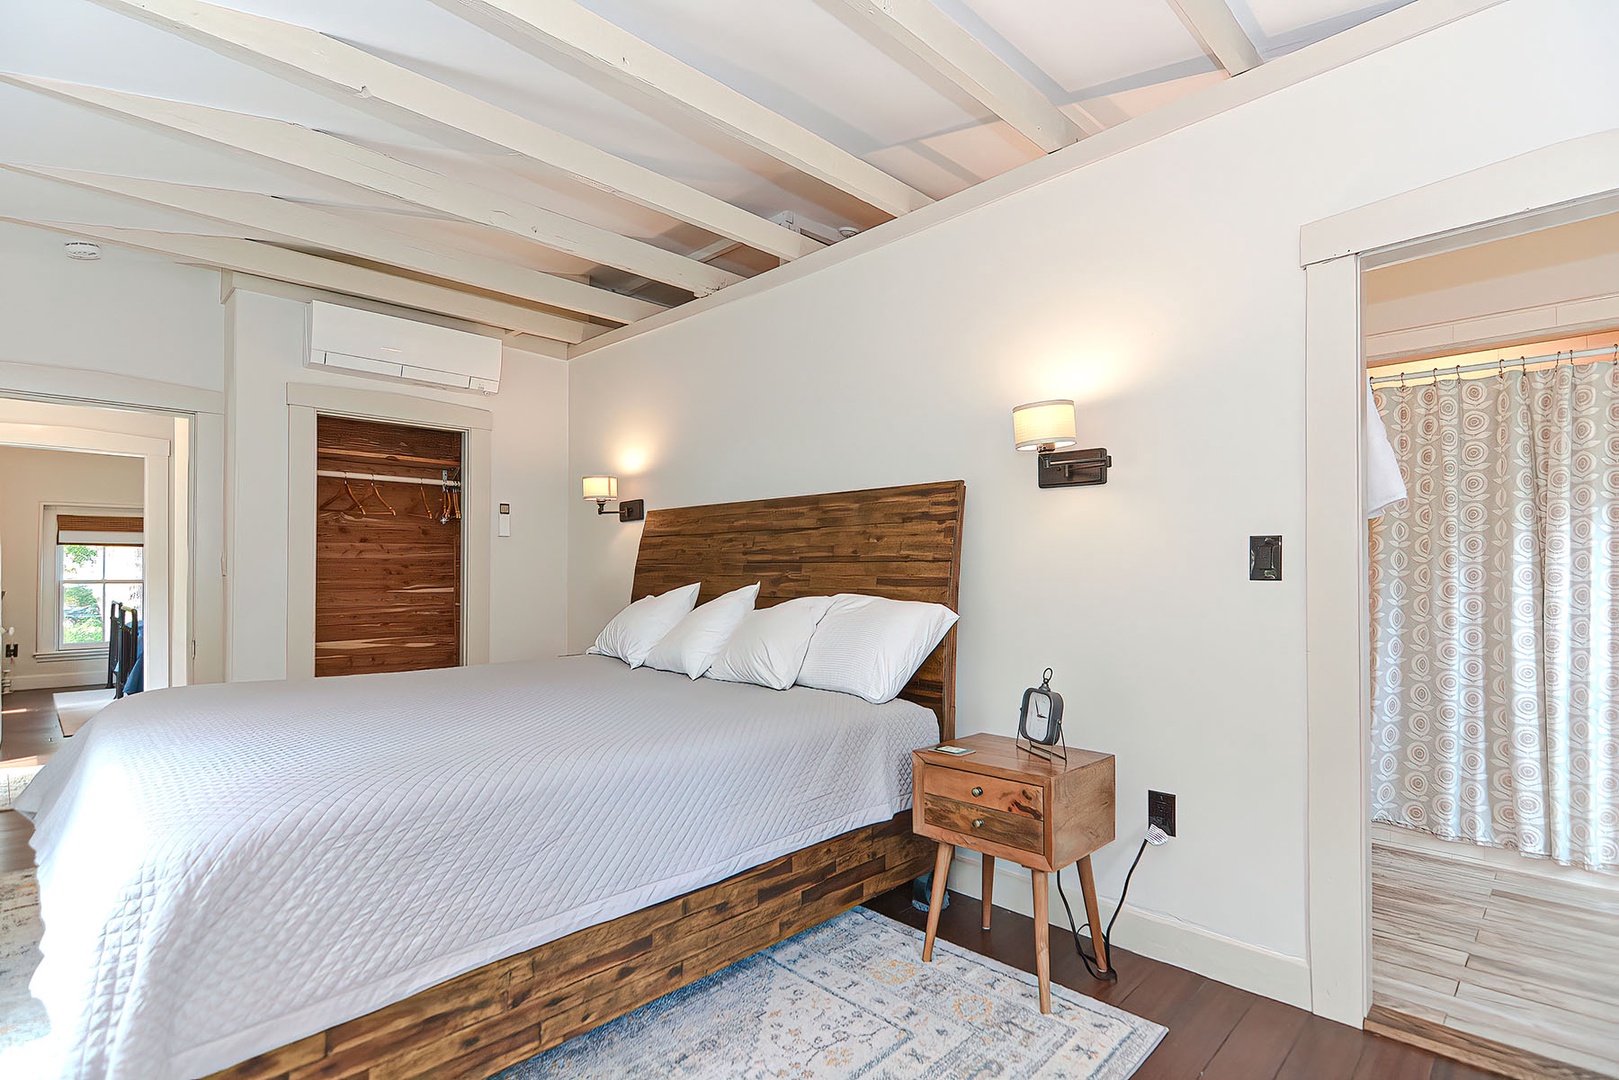 Architectural details include the exposed wooden beams and a cedar closet..